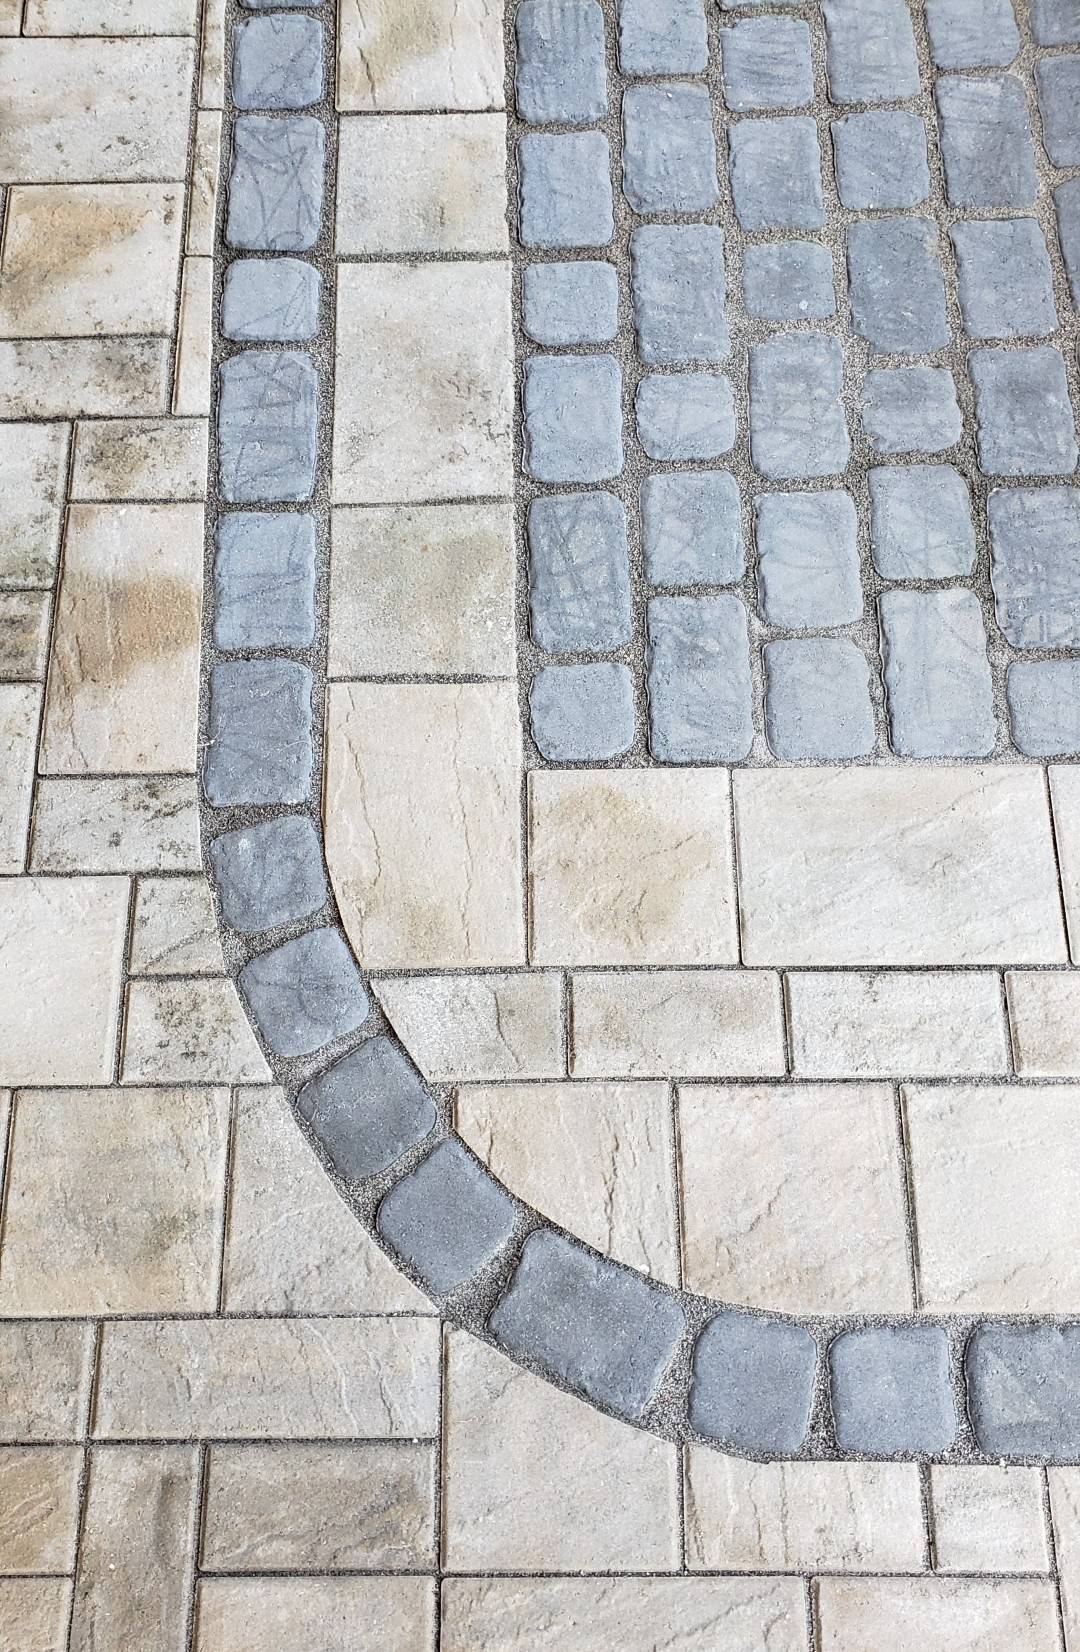 This image displays a patterned pavement with rectangular beige tiles and a curving line of square gray tiles creating a contrast in texture and color.